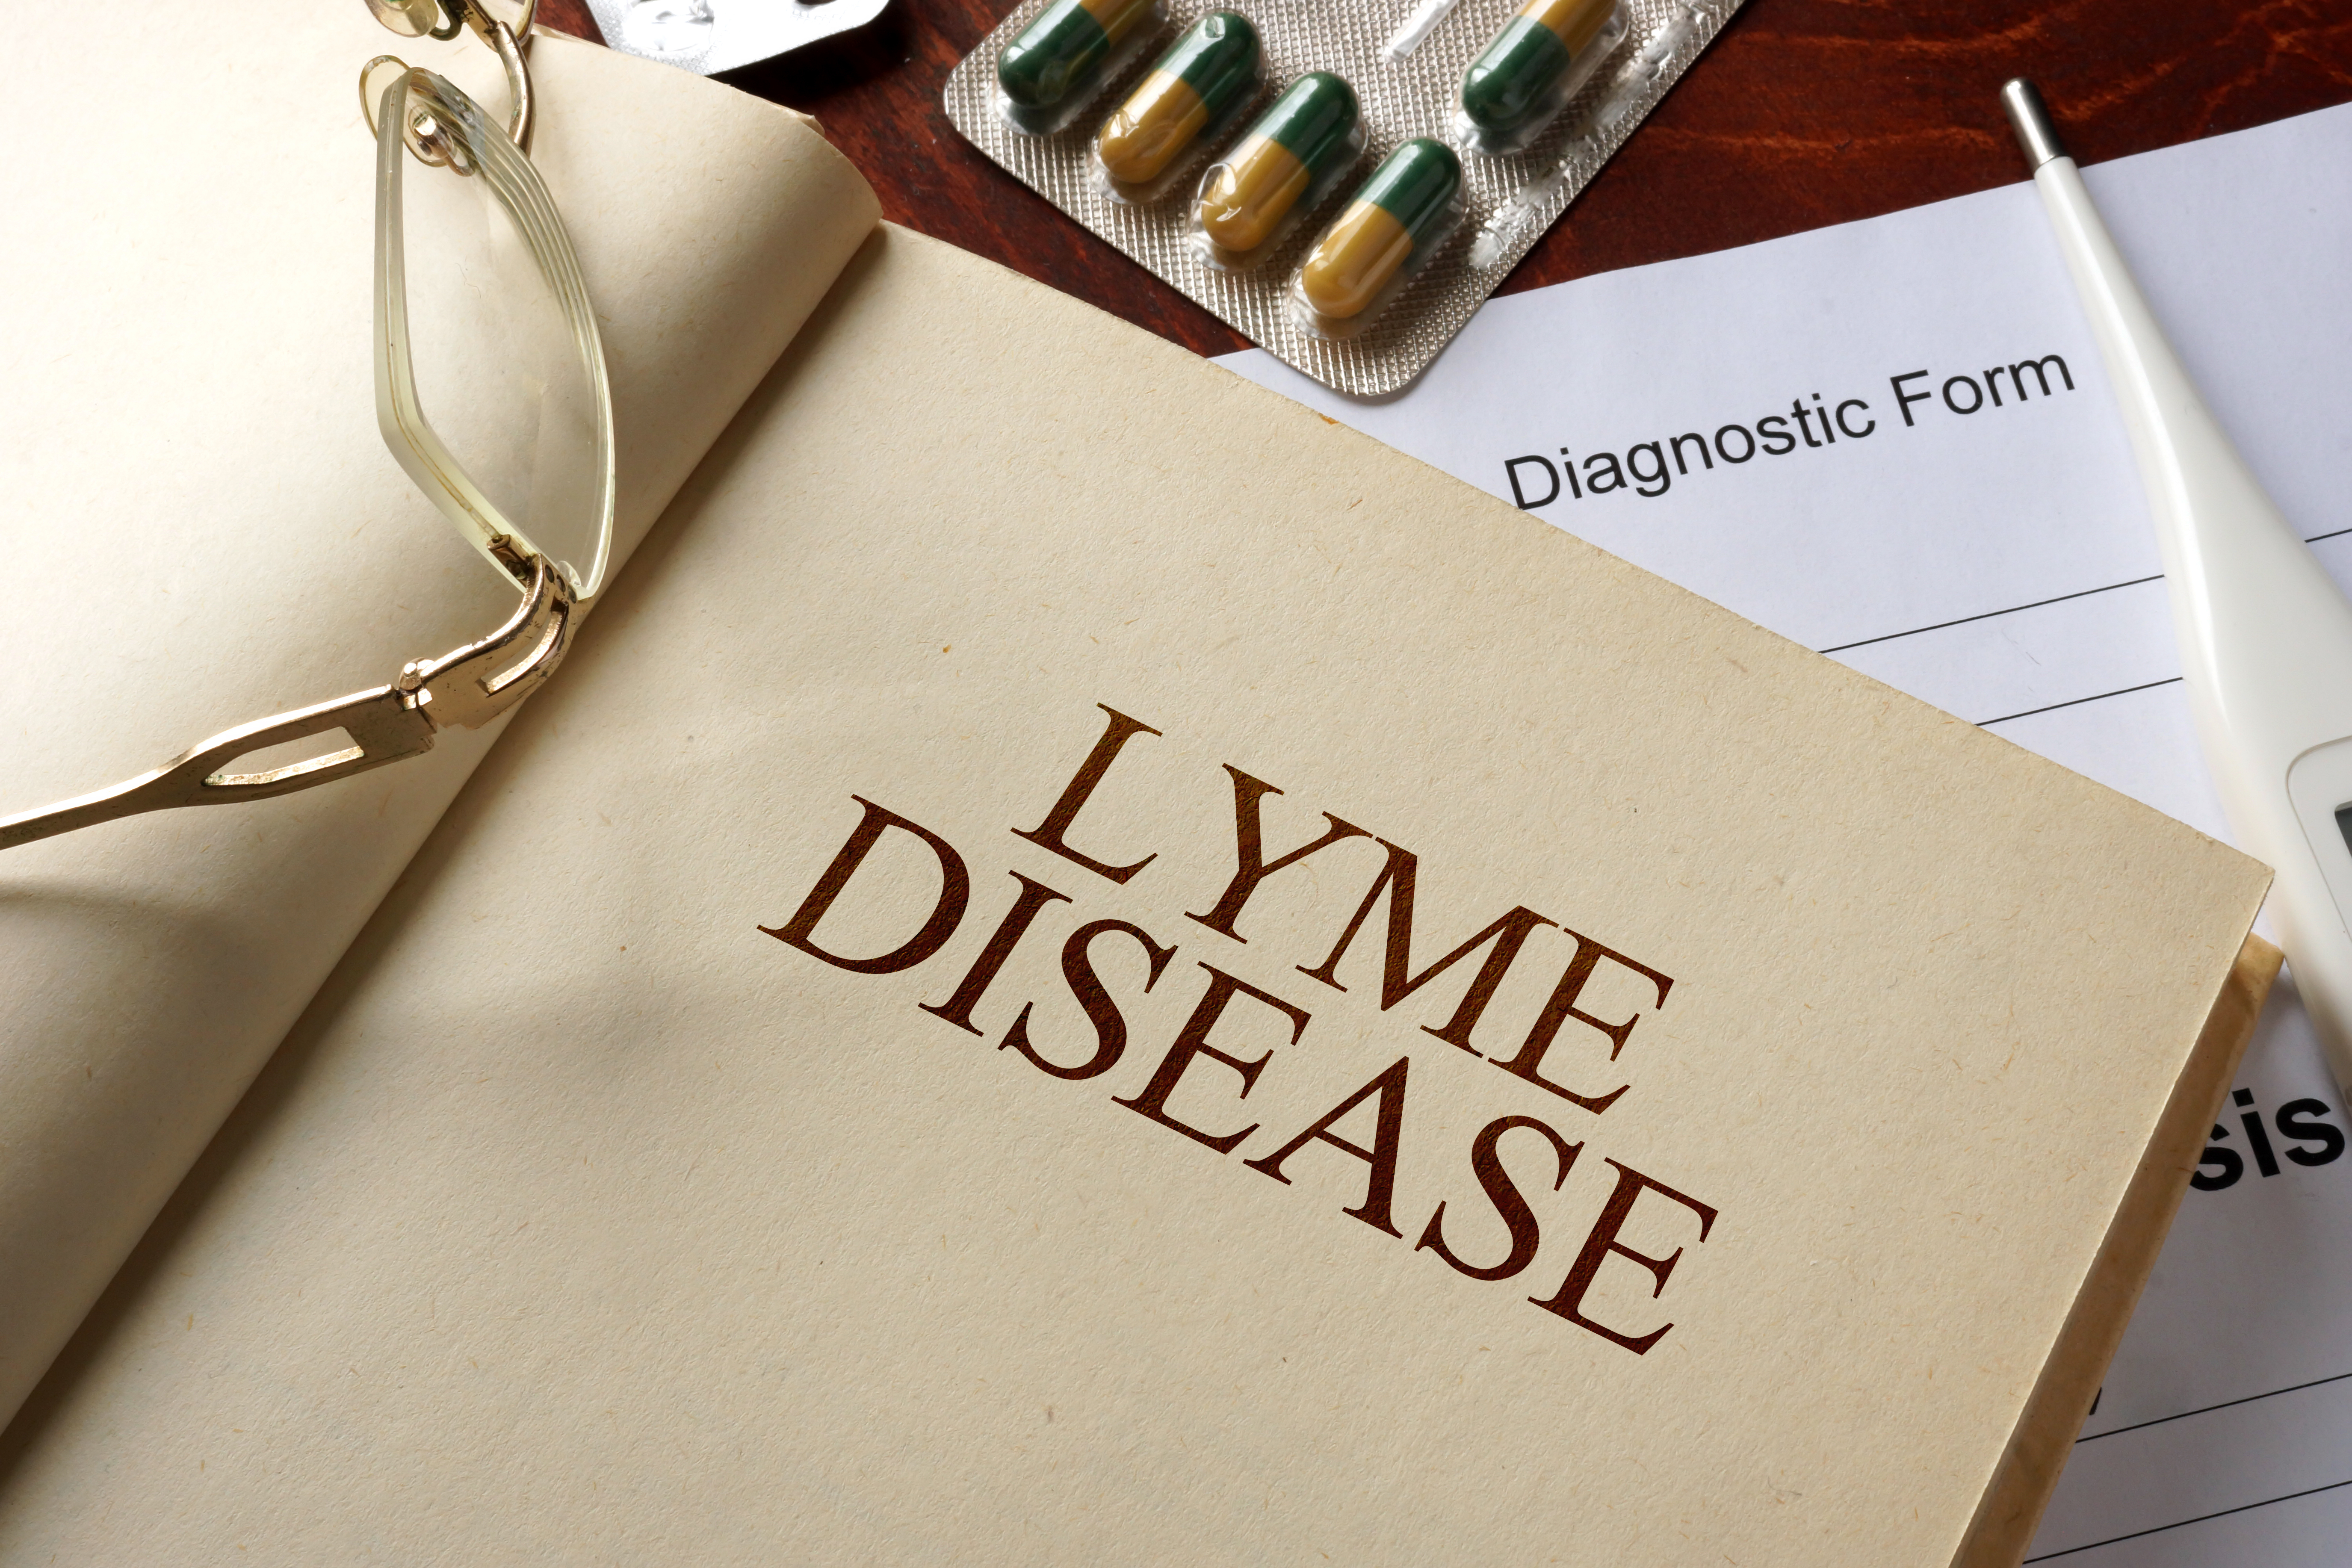 New studies are learning so much about Lyme Disease.